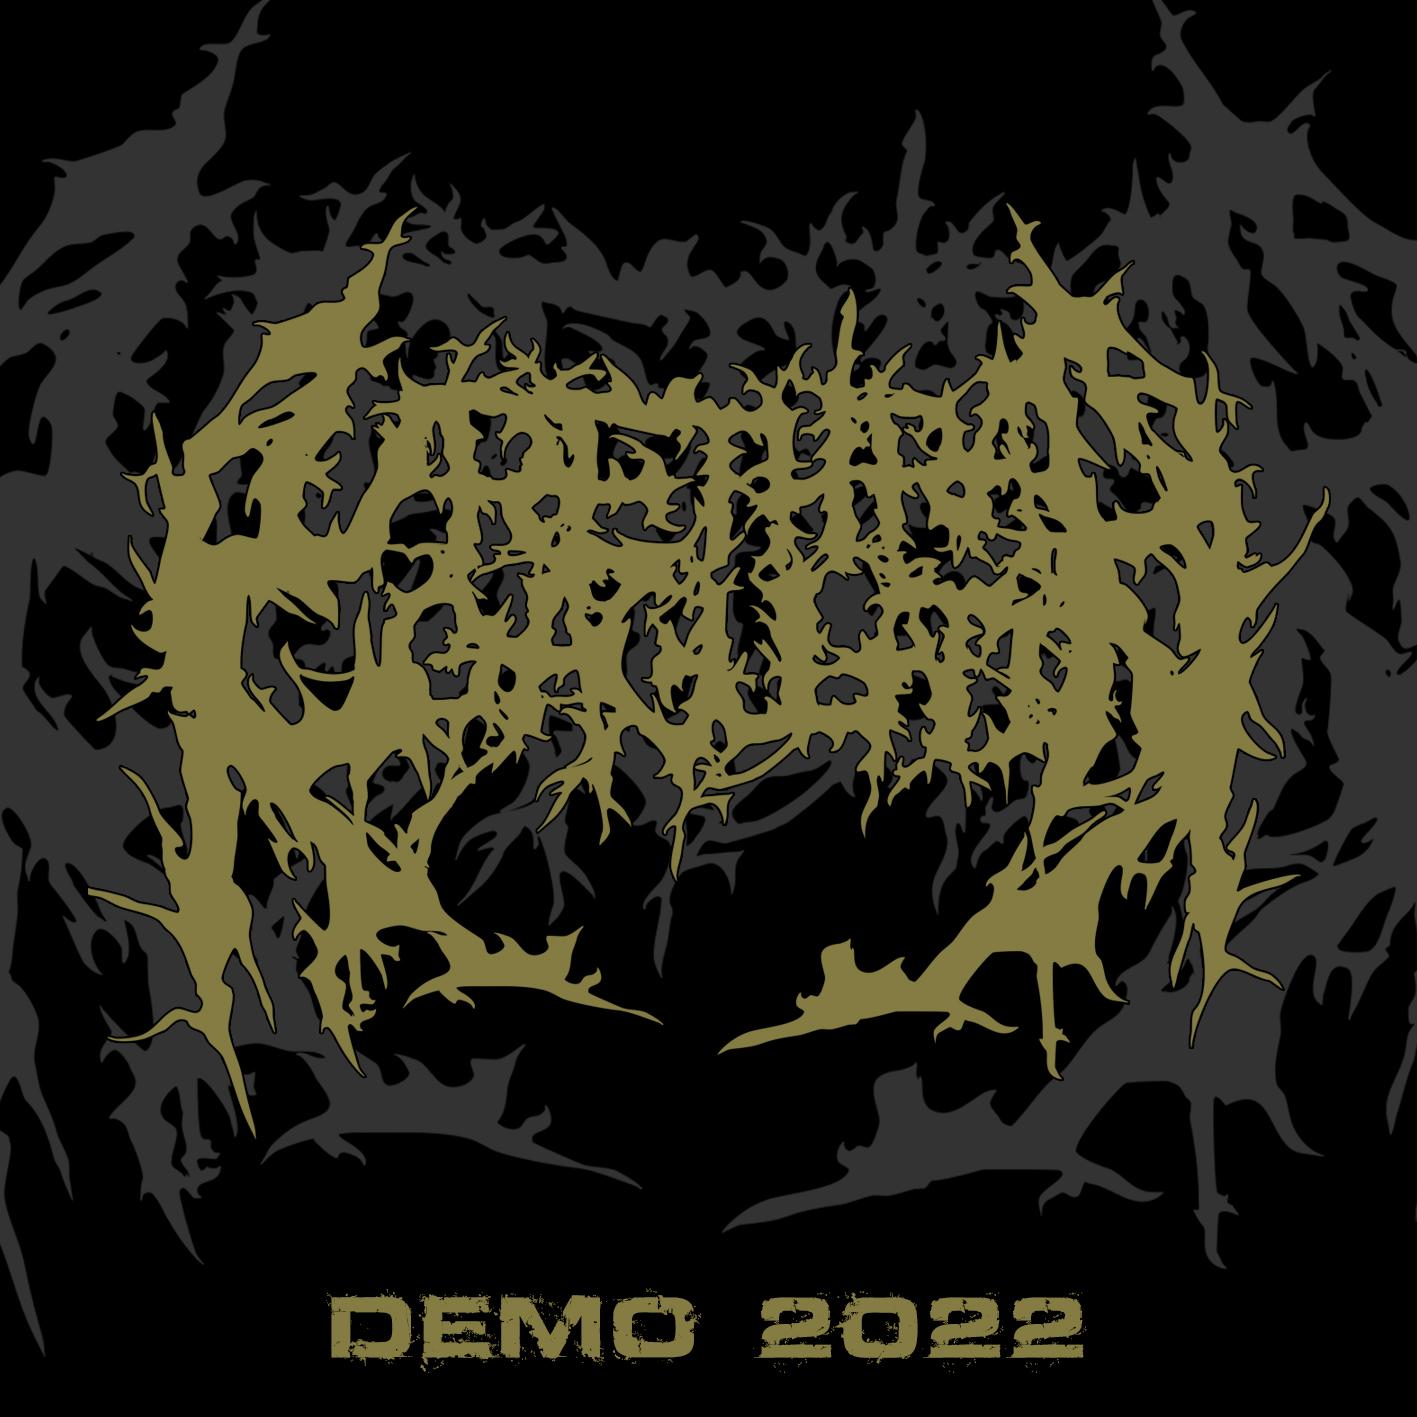 Demo 2022. Lexan – Demo (2022). Whiplash - messages in Blood the early demos (2022). Condemned Cover.